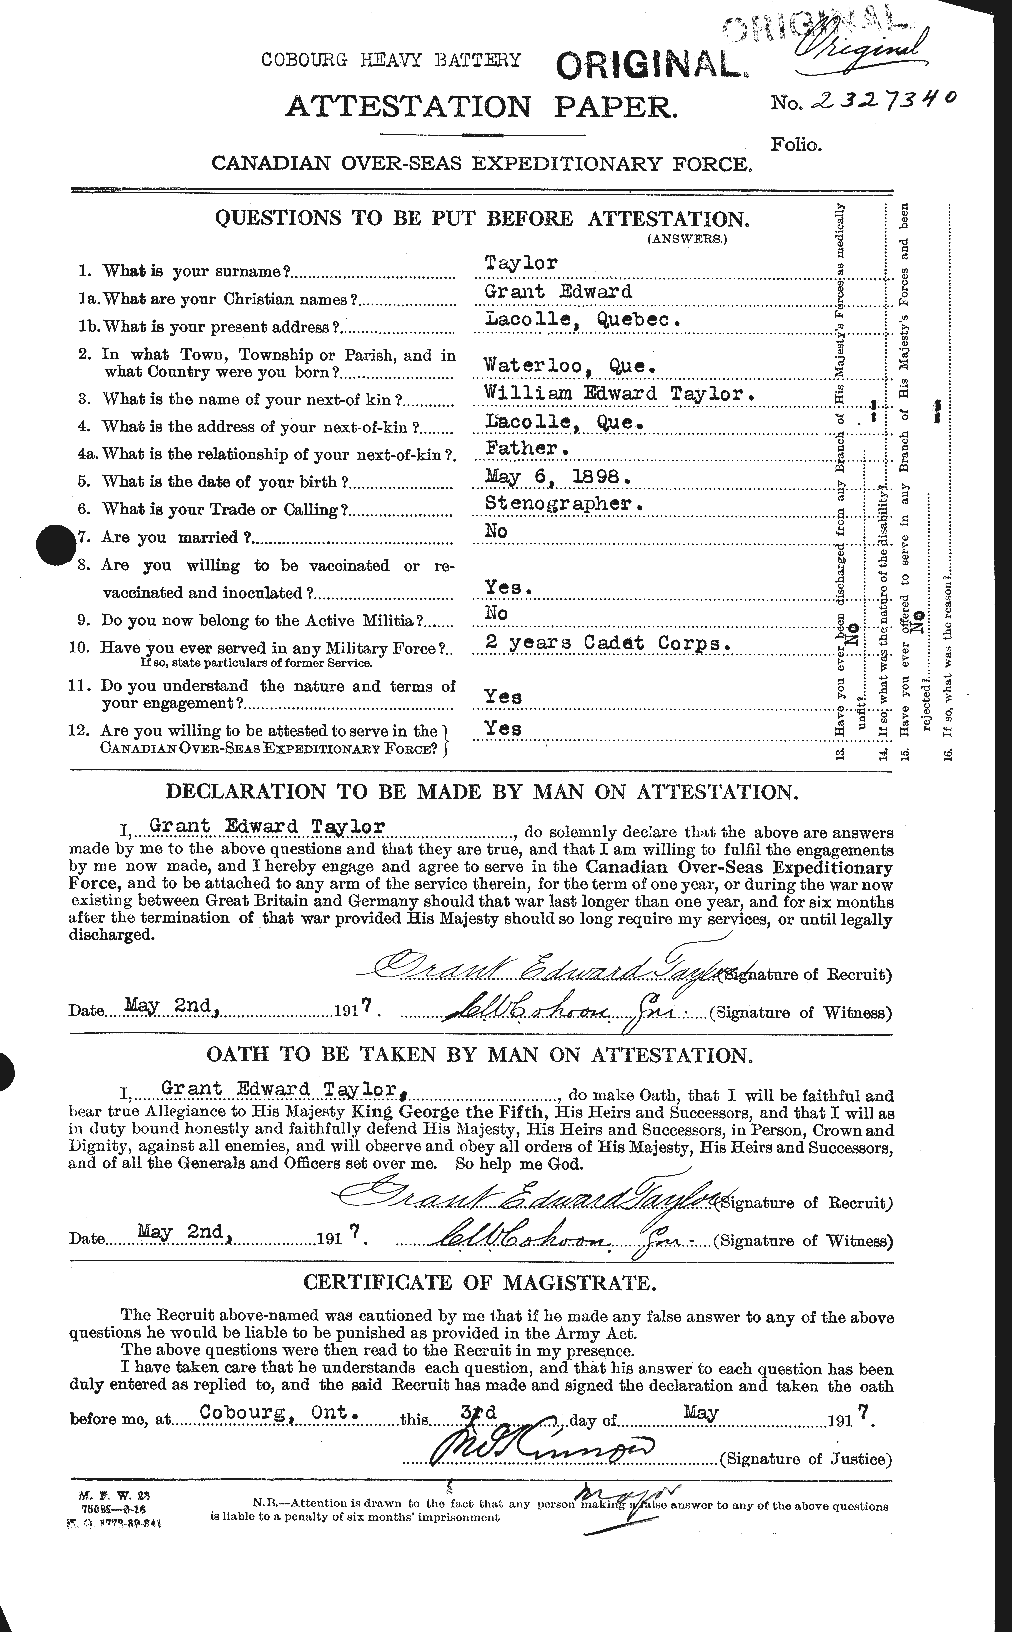 Personnel Records of the First World War - CEF 626393a